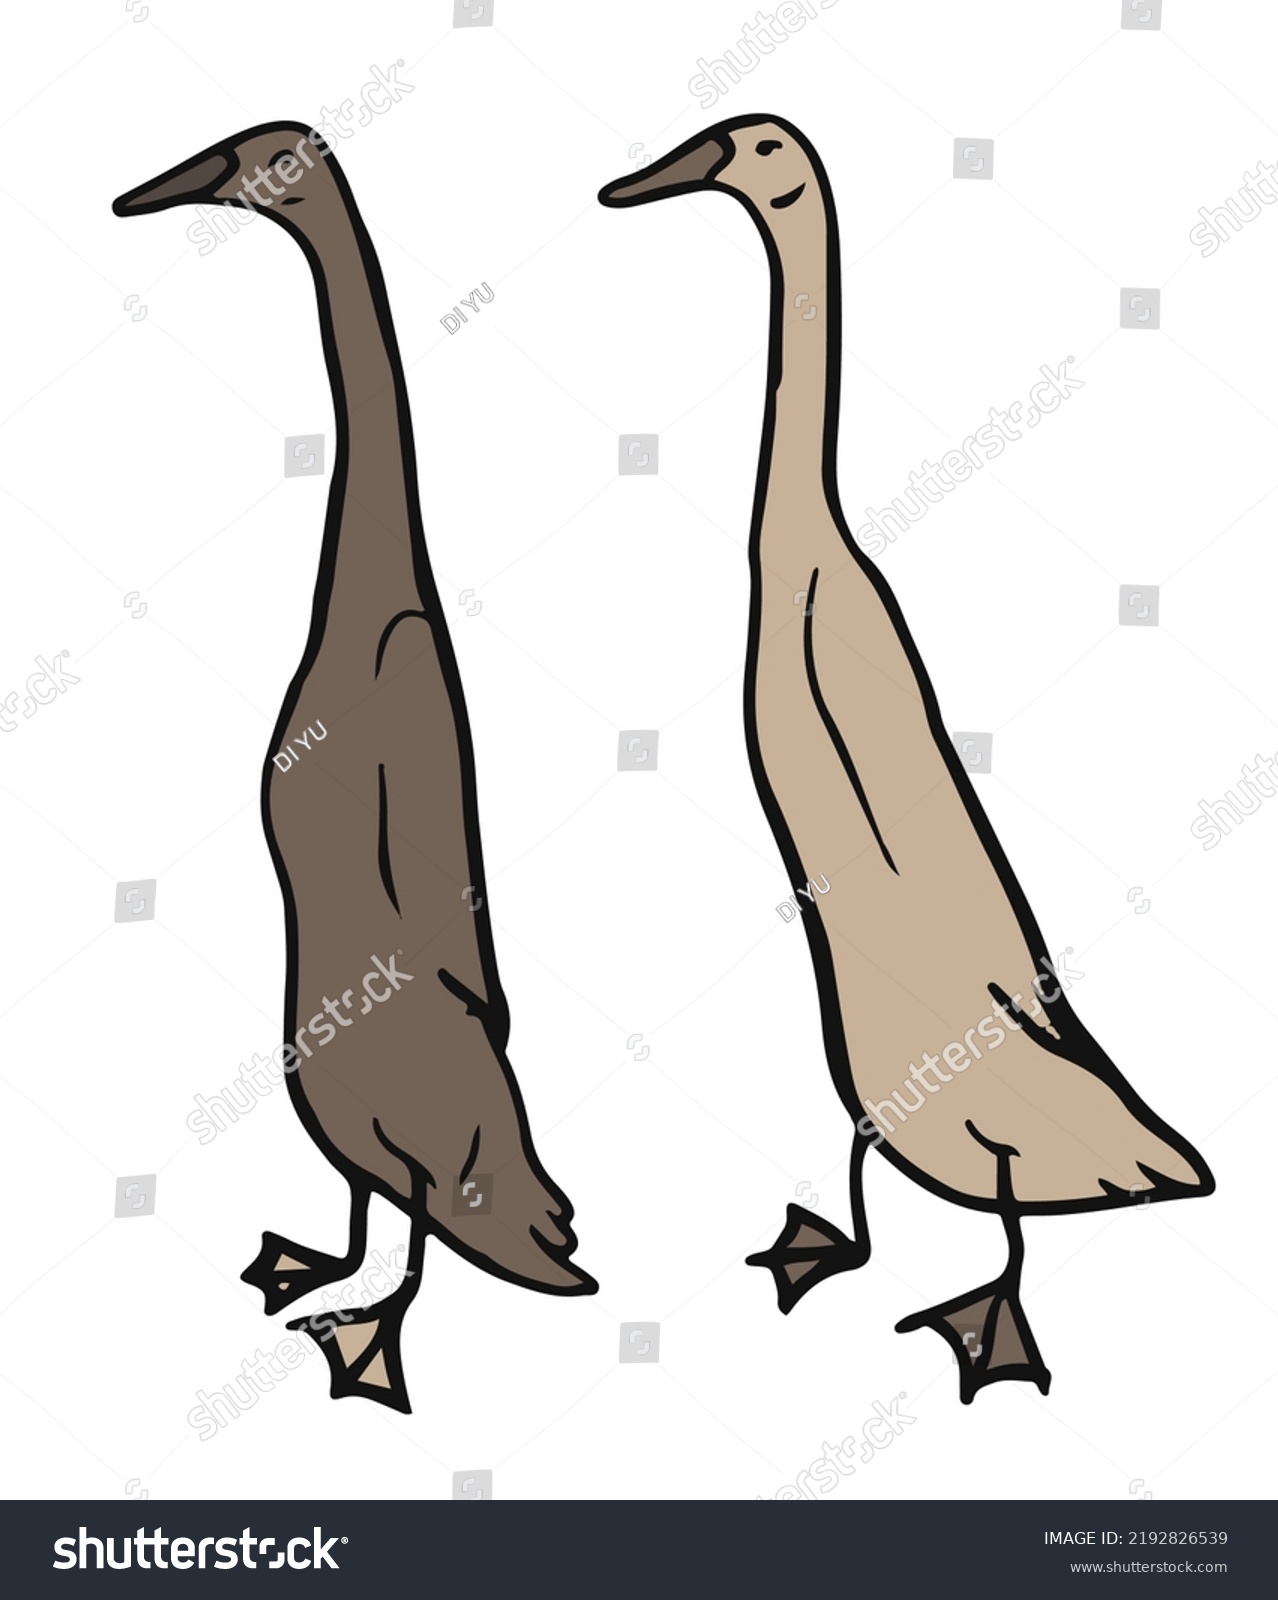 SVG of Two Indian runner duck isolated on white background. svg